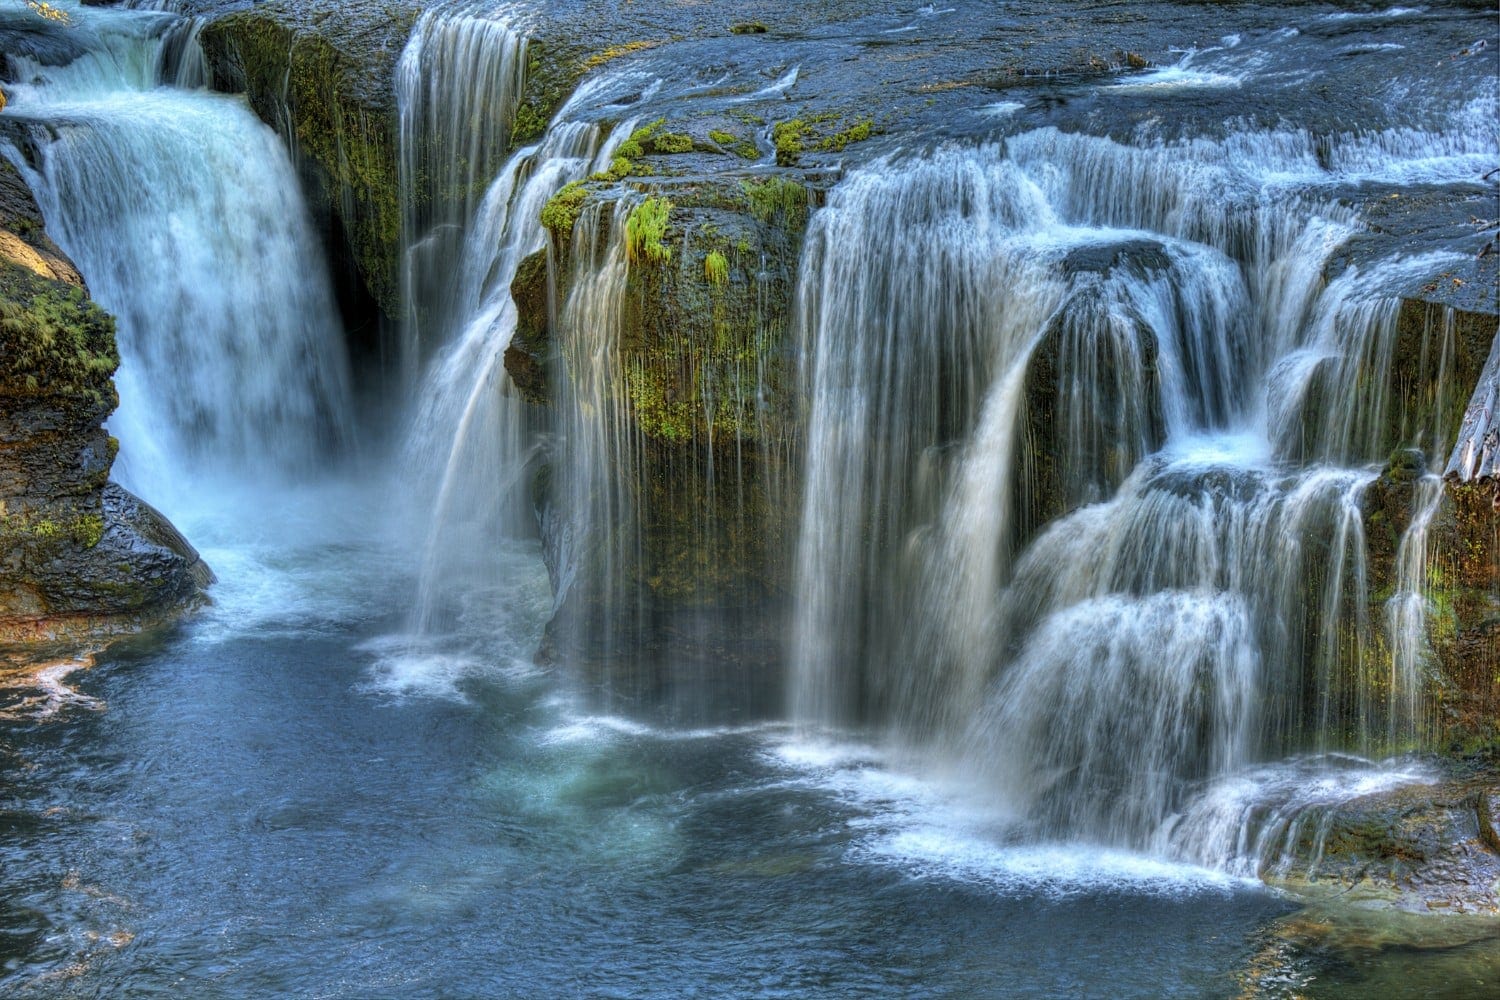 The Lower Lewis Falls in Washington State's Gifford Pinchot national Forest